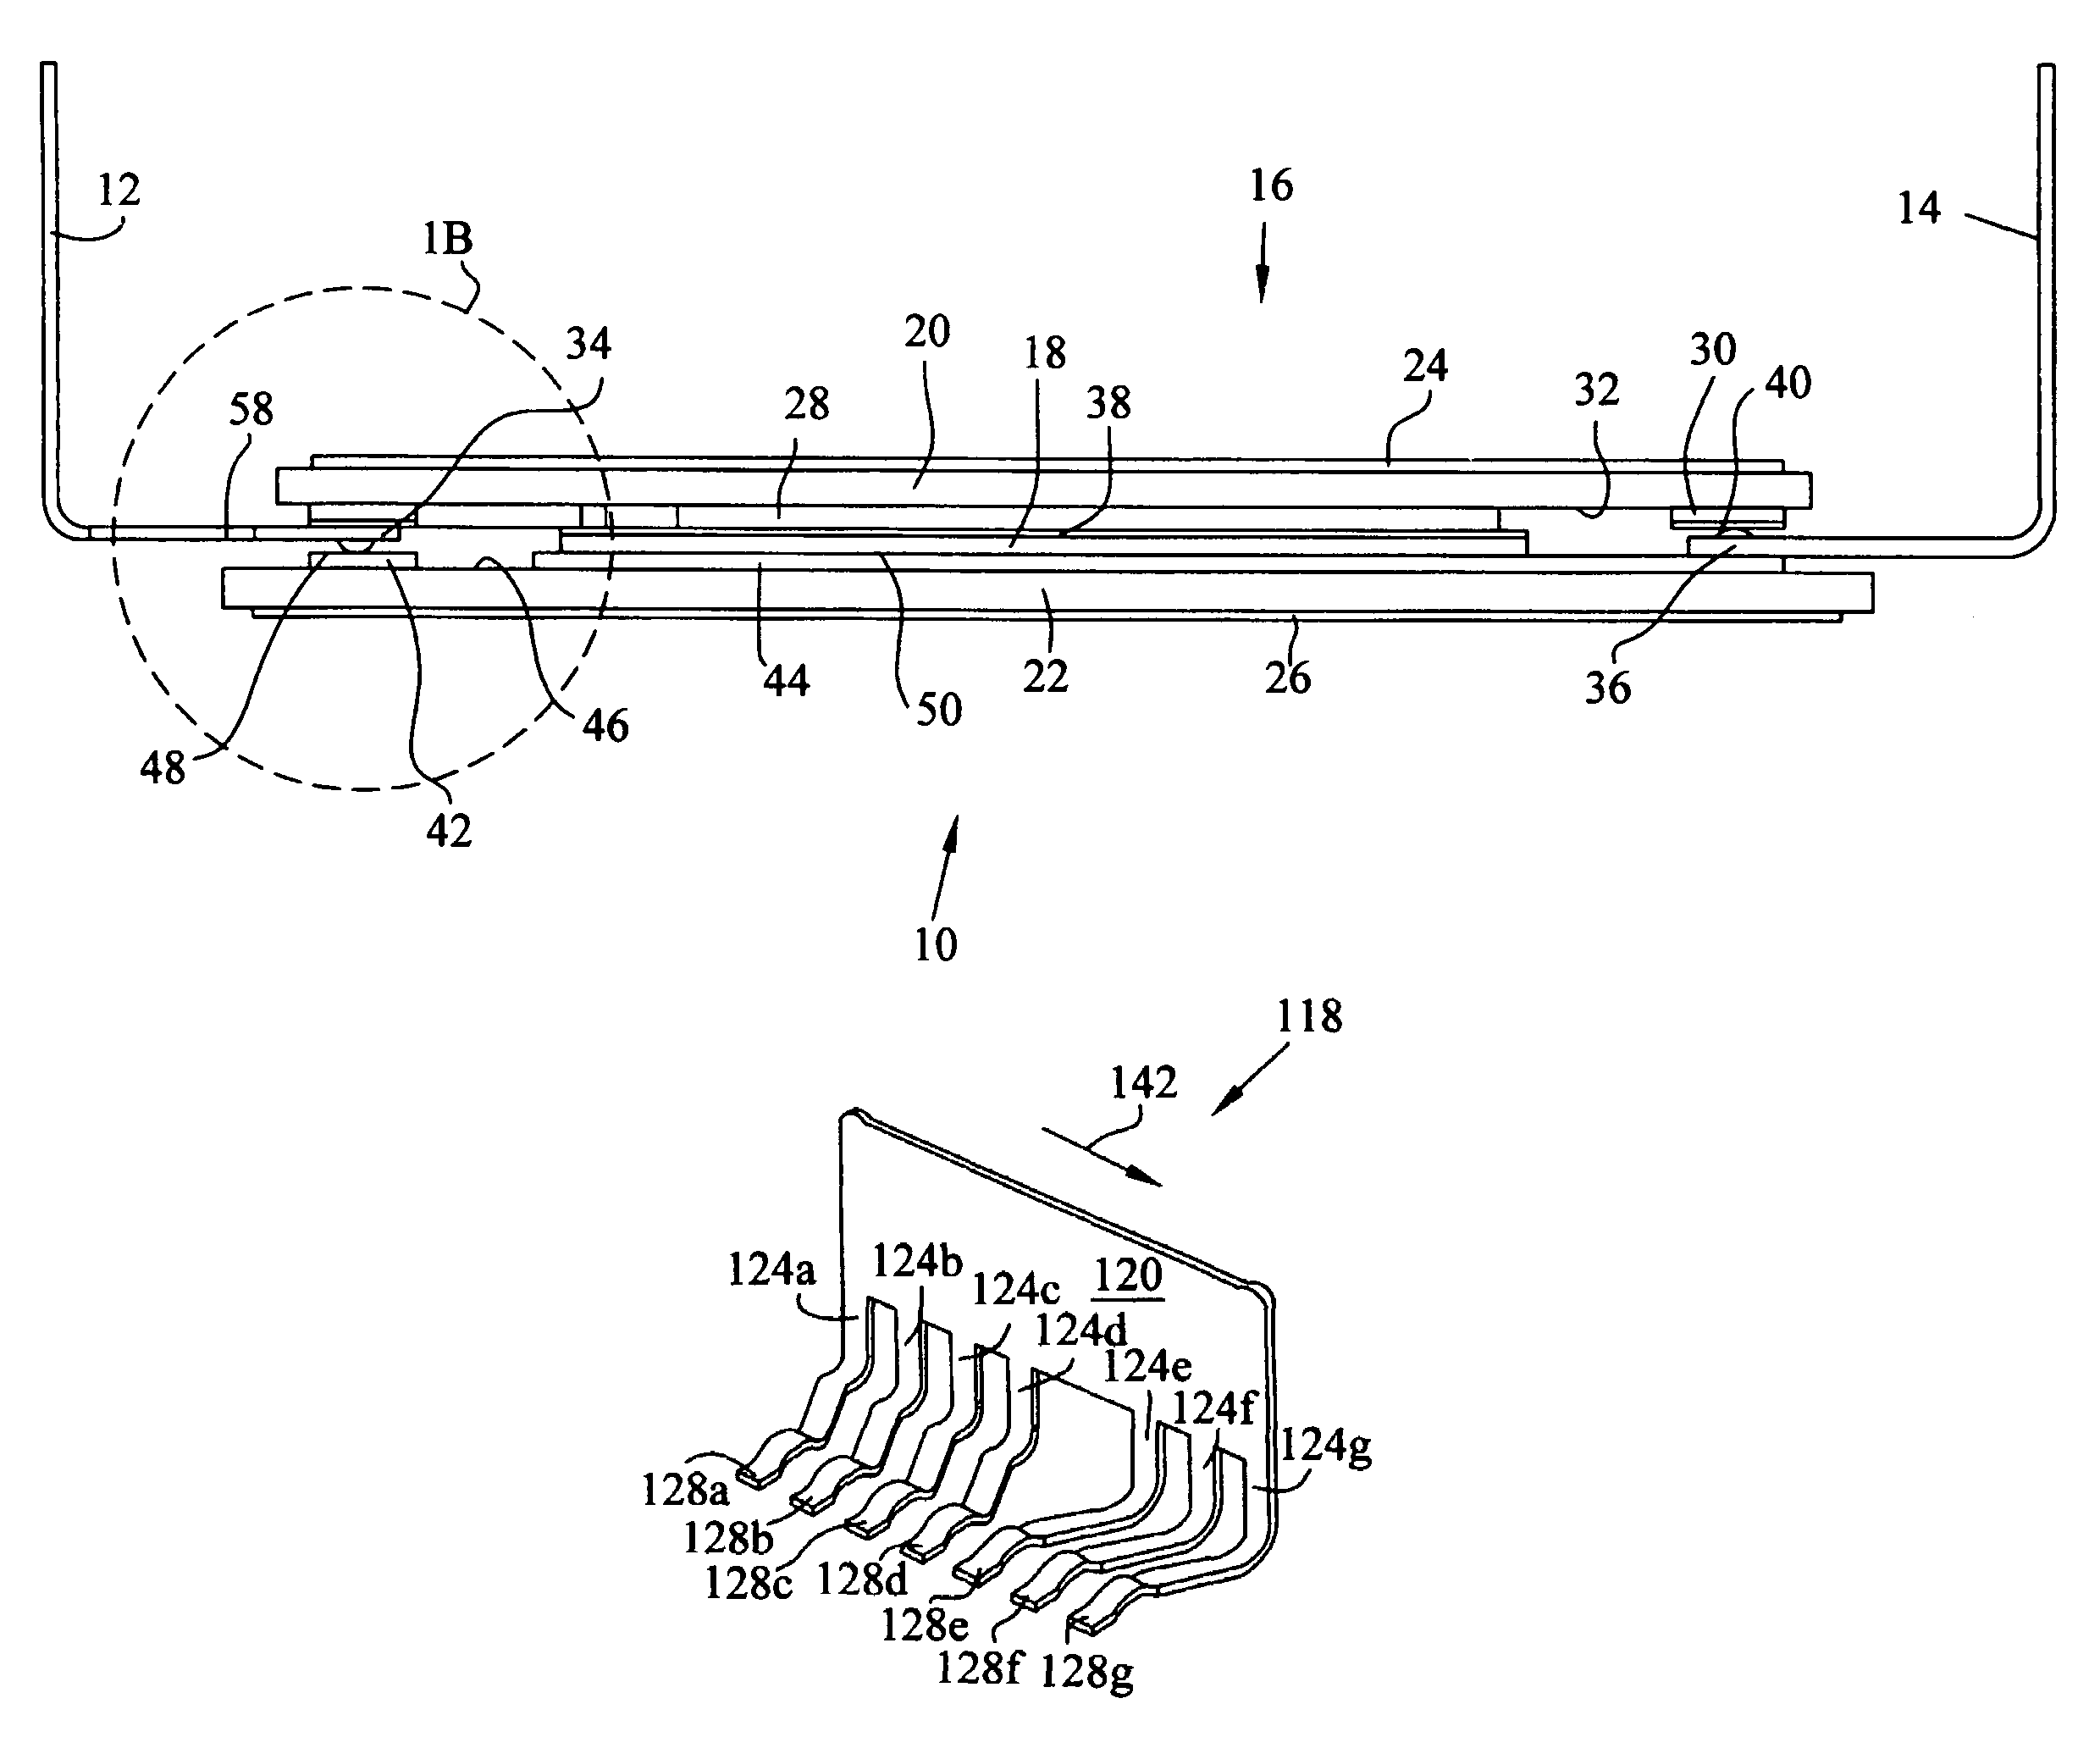 Dual-sided substrate integrated circuit package including a leadframe having leads with increased thickness